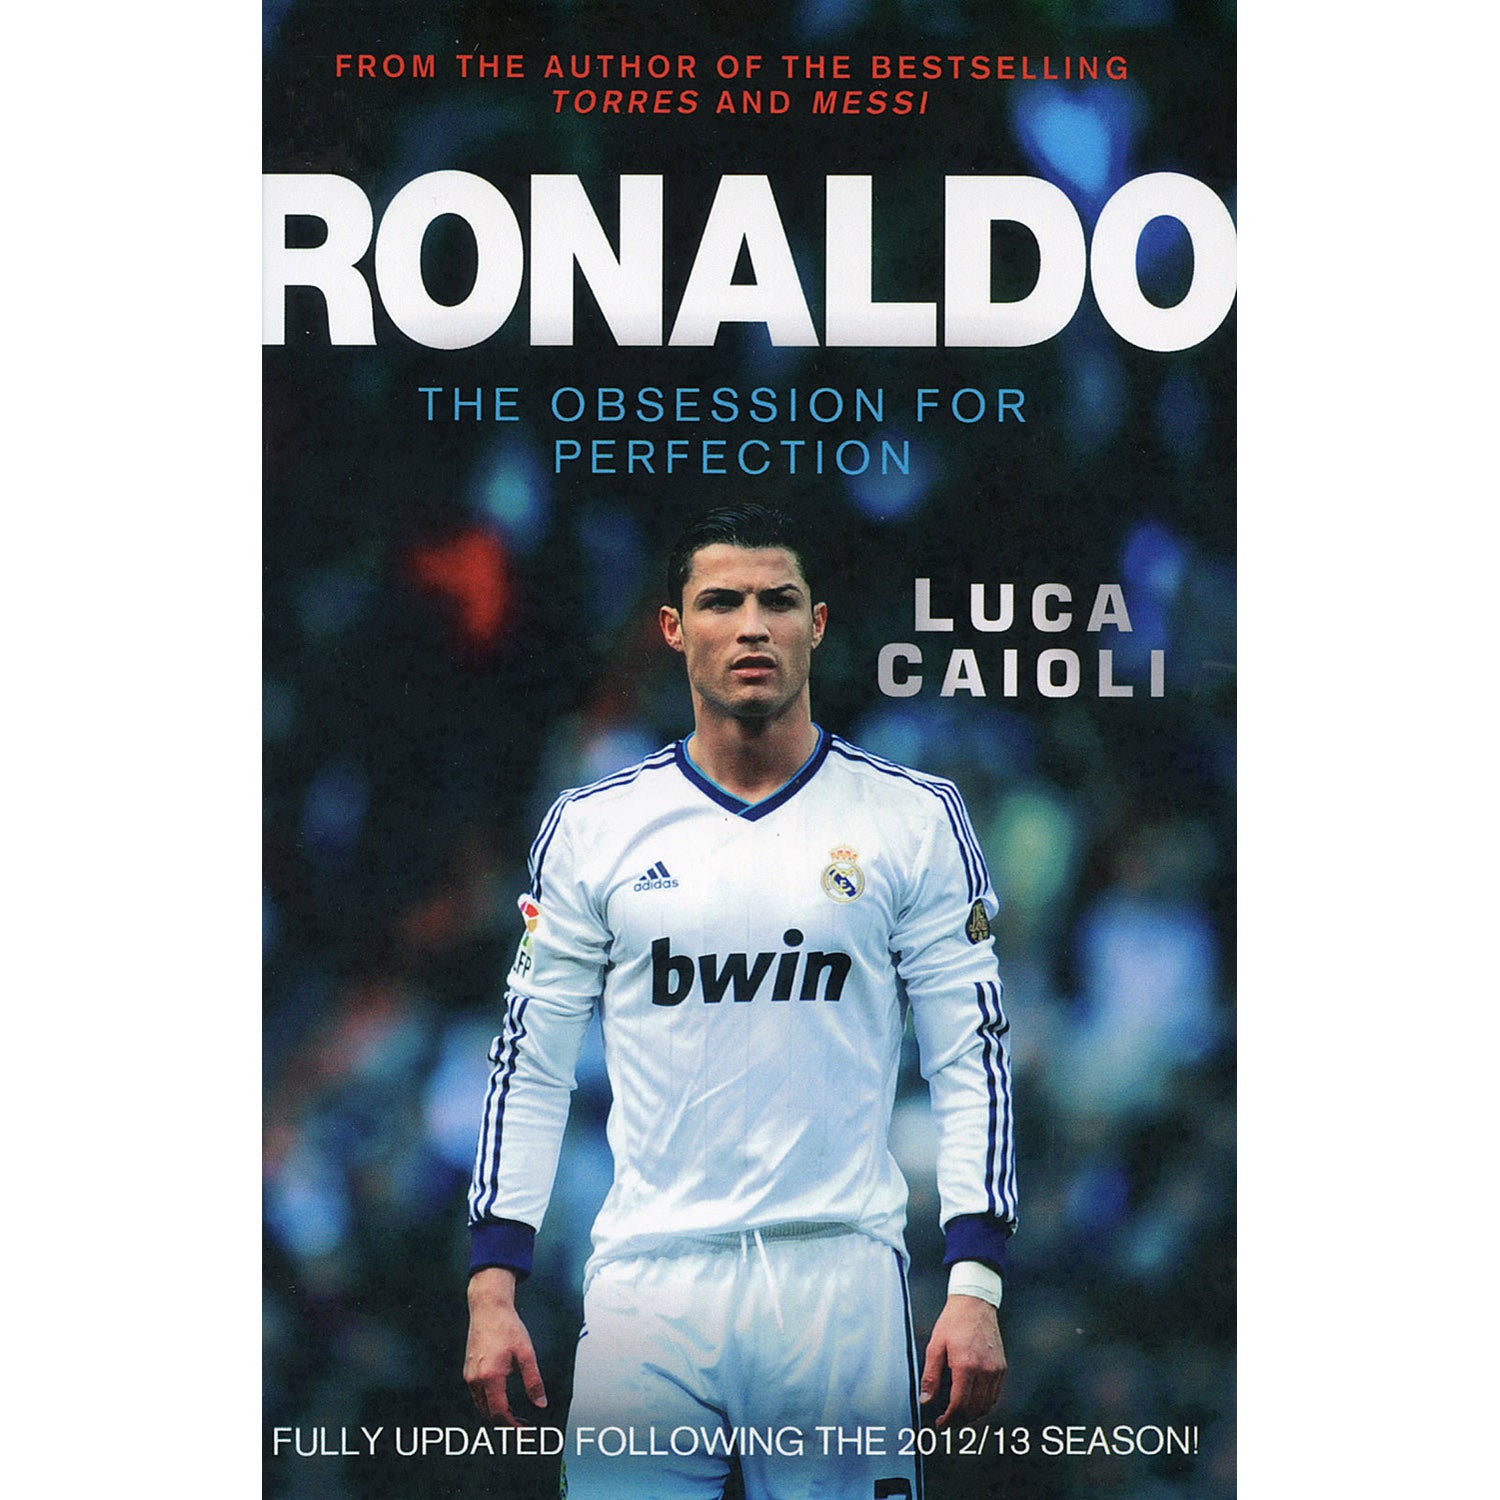 Ronaldo – The Obsession for Perfection